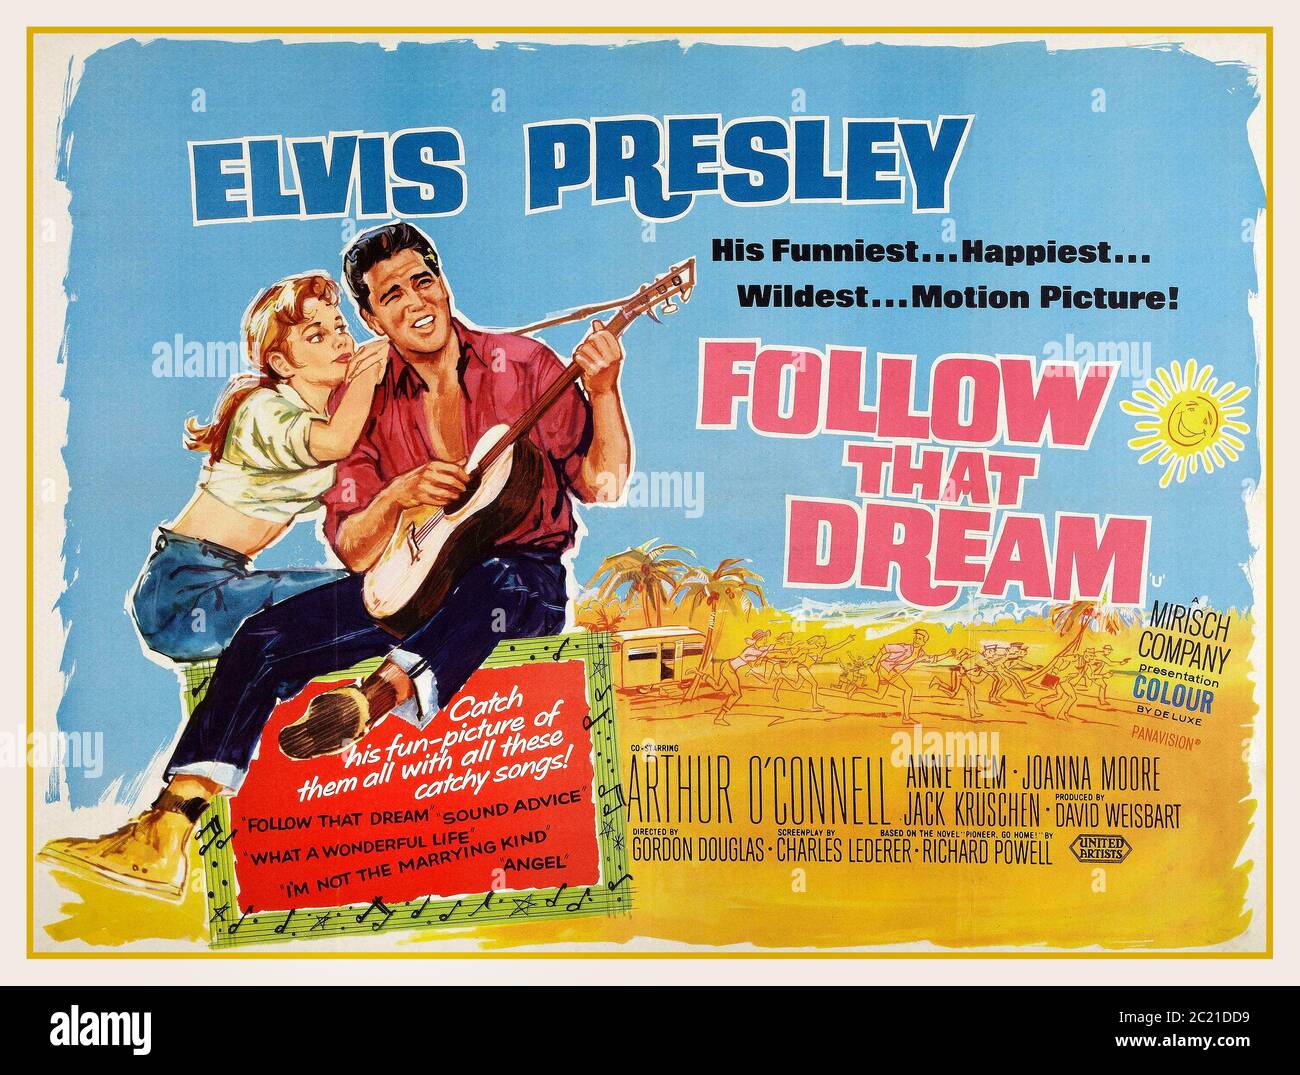 Vintage Elvis Presley Movie Film Poster Follow That Dream (1962) Starring Elvis Presley, Arthur O'Connell, Anne Helm Director: Gordon Douglas Initial release: 11 April 1962. Follow That Dream is a 1962 American musical film starring Elvis Presley made by Mirisch Productions. The movie was based on the 1959 novel Pioneer, Go Home! by Richard P. Powell. Producer Walter Mirisch liked the song Follow that Dream and retitled the picture. Stock Photo